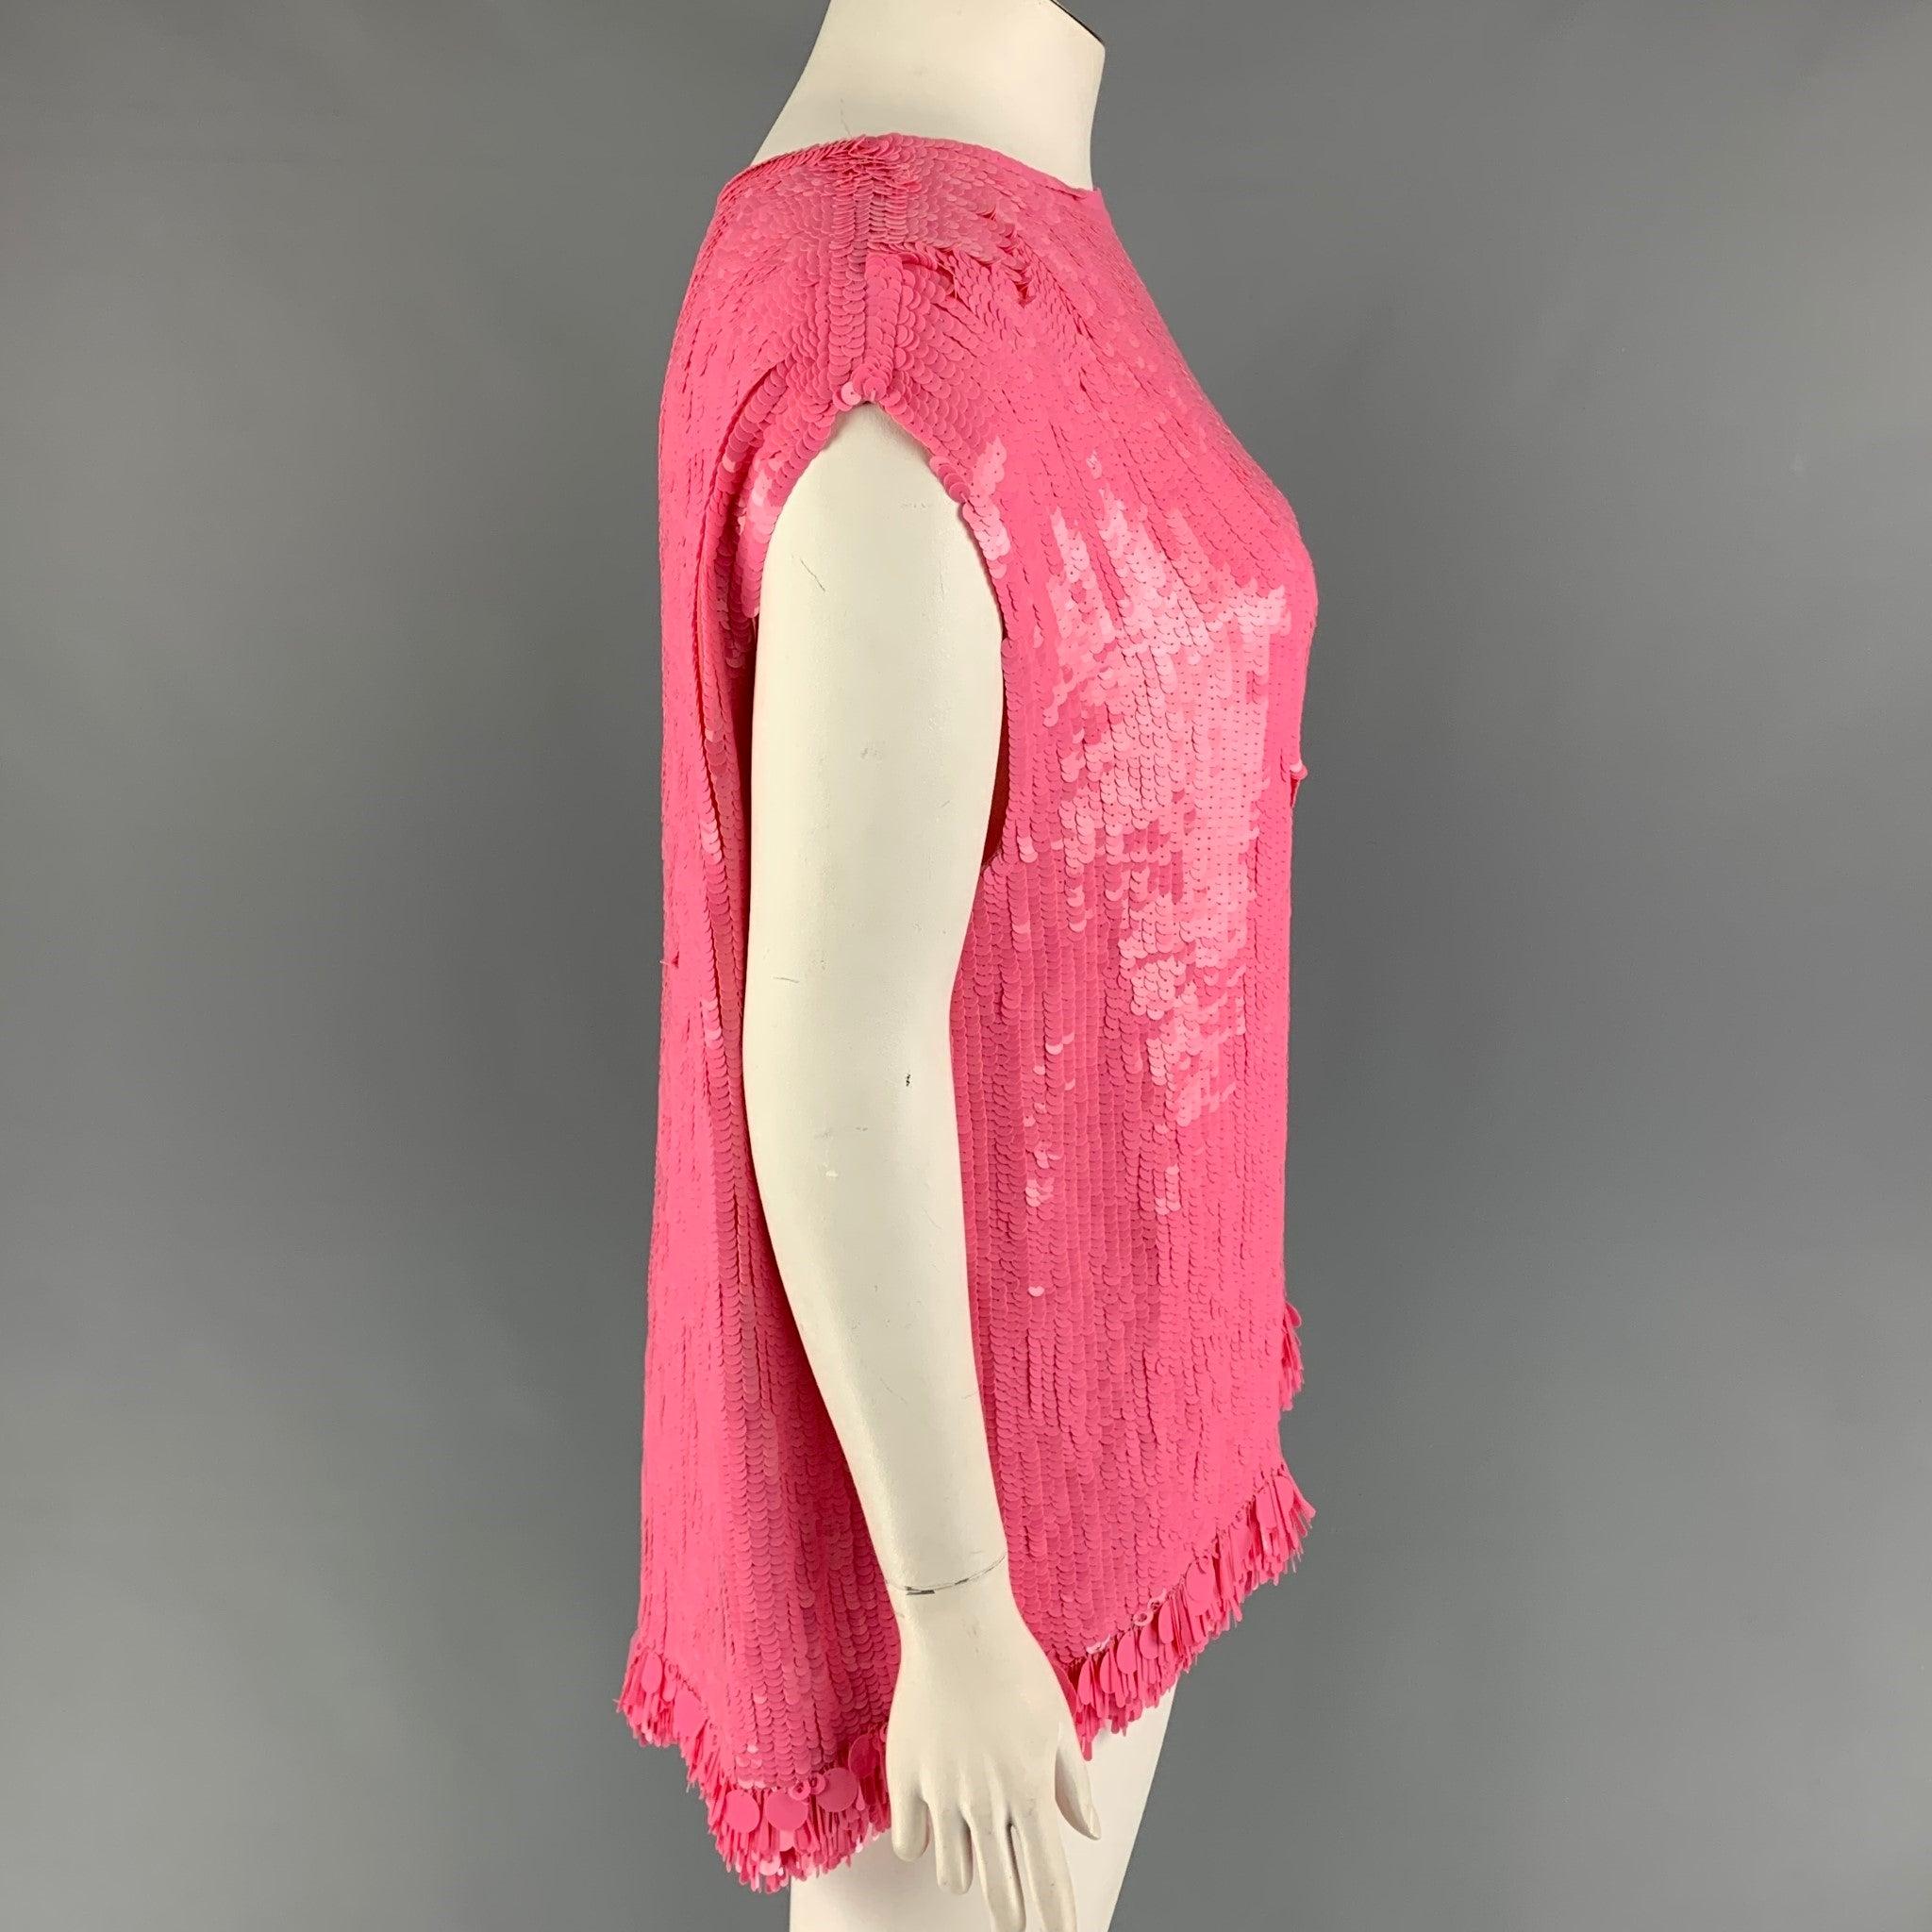 DRIES VAN NOTEN Fall-Winter 2021 dress top comes in a pink viscose featuring a sequined design throughout and a sleeveless style.
Excellent
Pre-Owned Condition. 

Marked:  42 

Measurements: 
 
Shoulder: 20 inches Bust: 42 inches Length: 29 inches 
